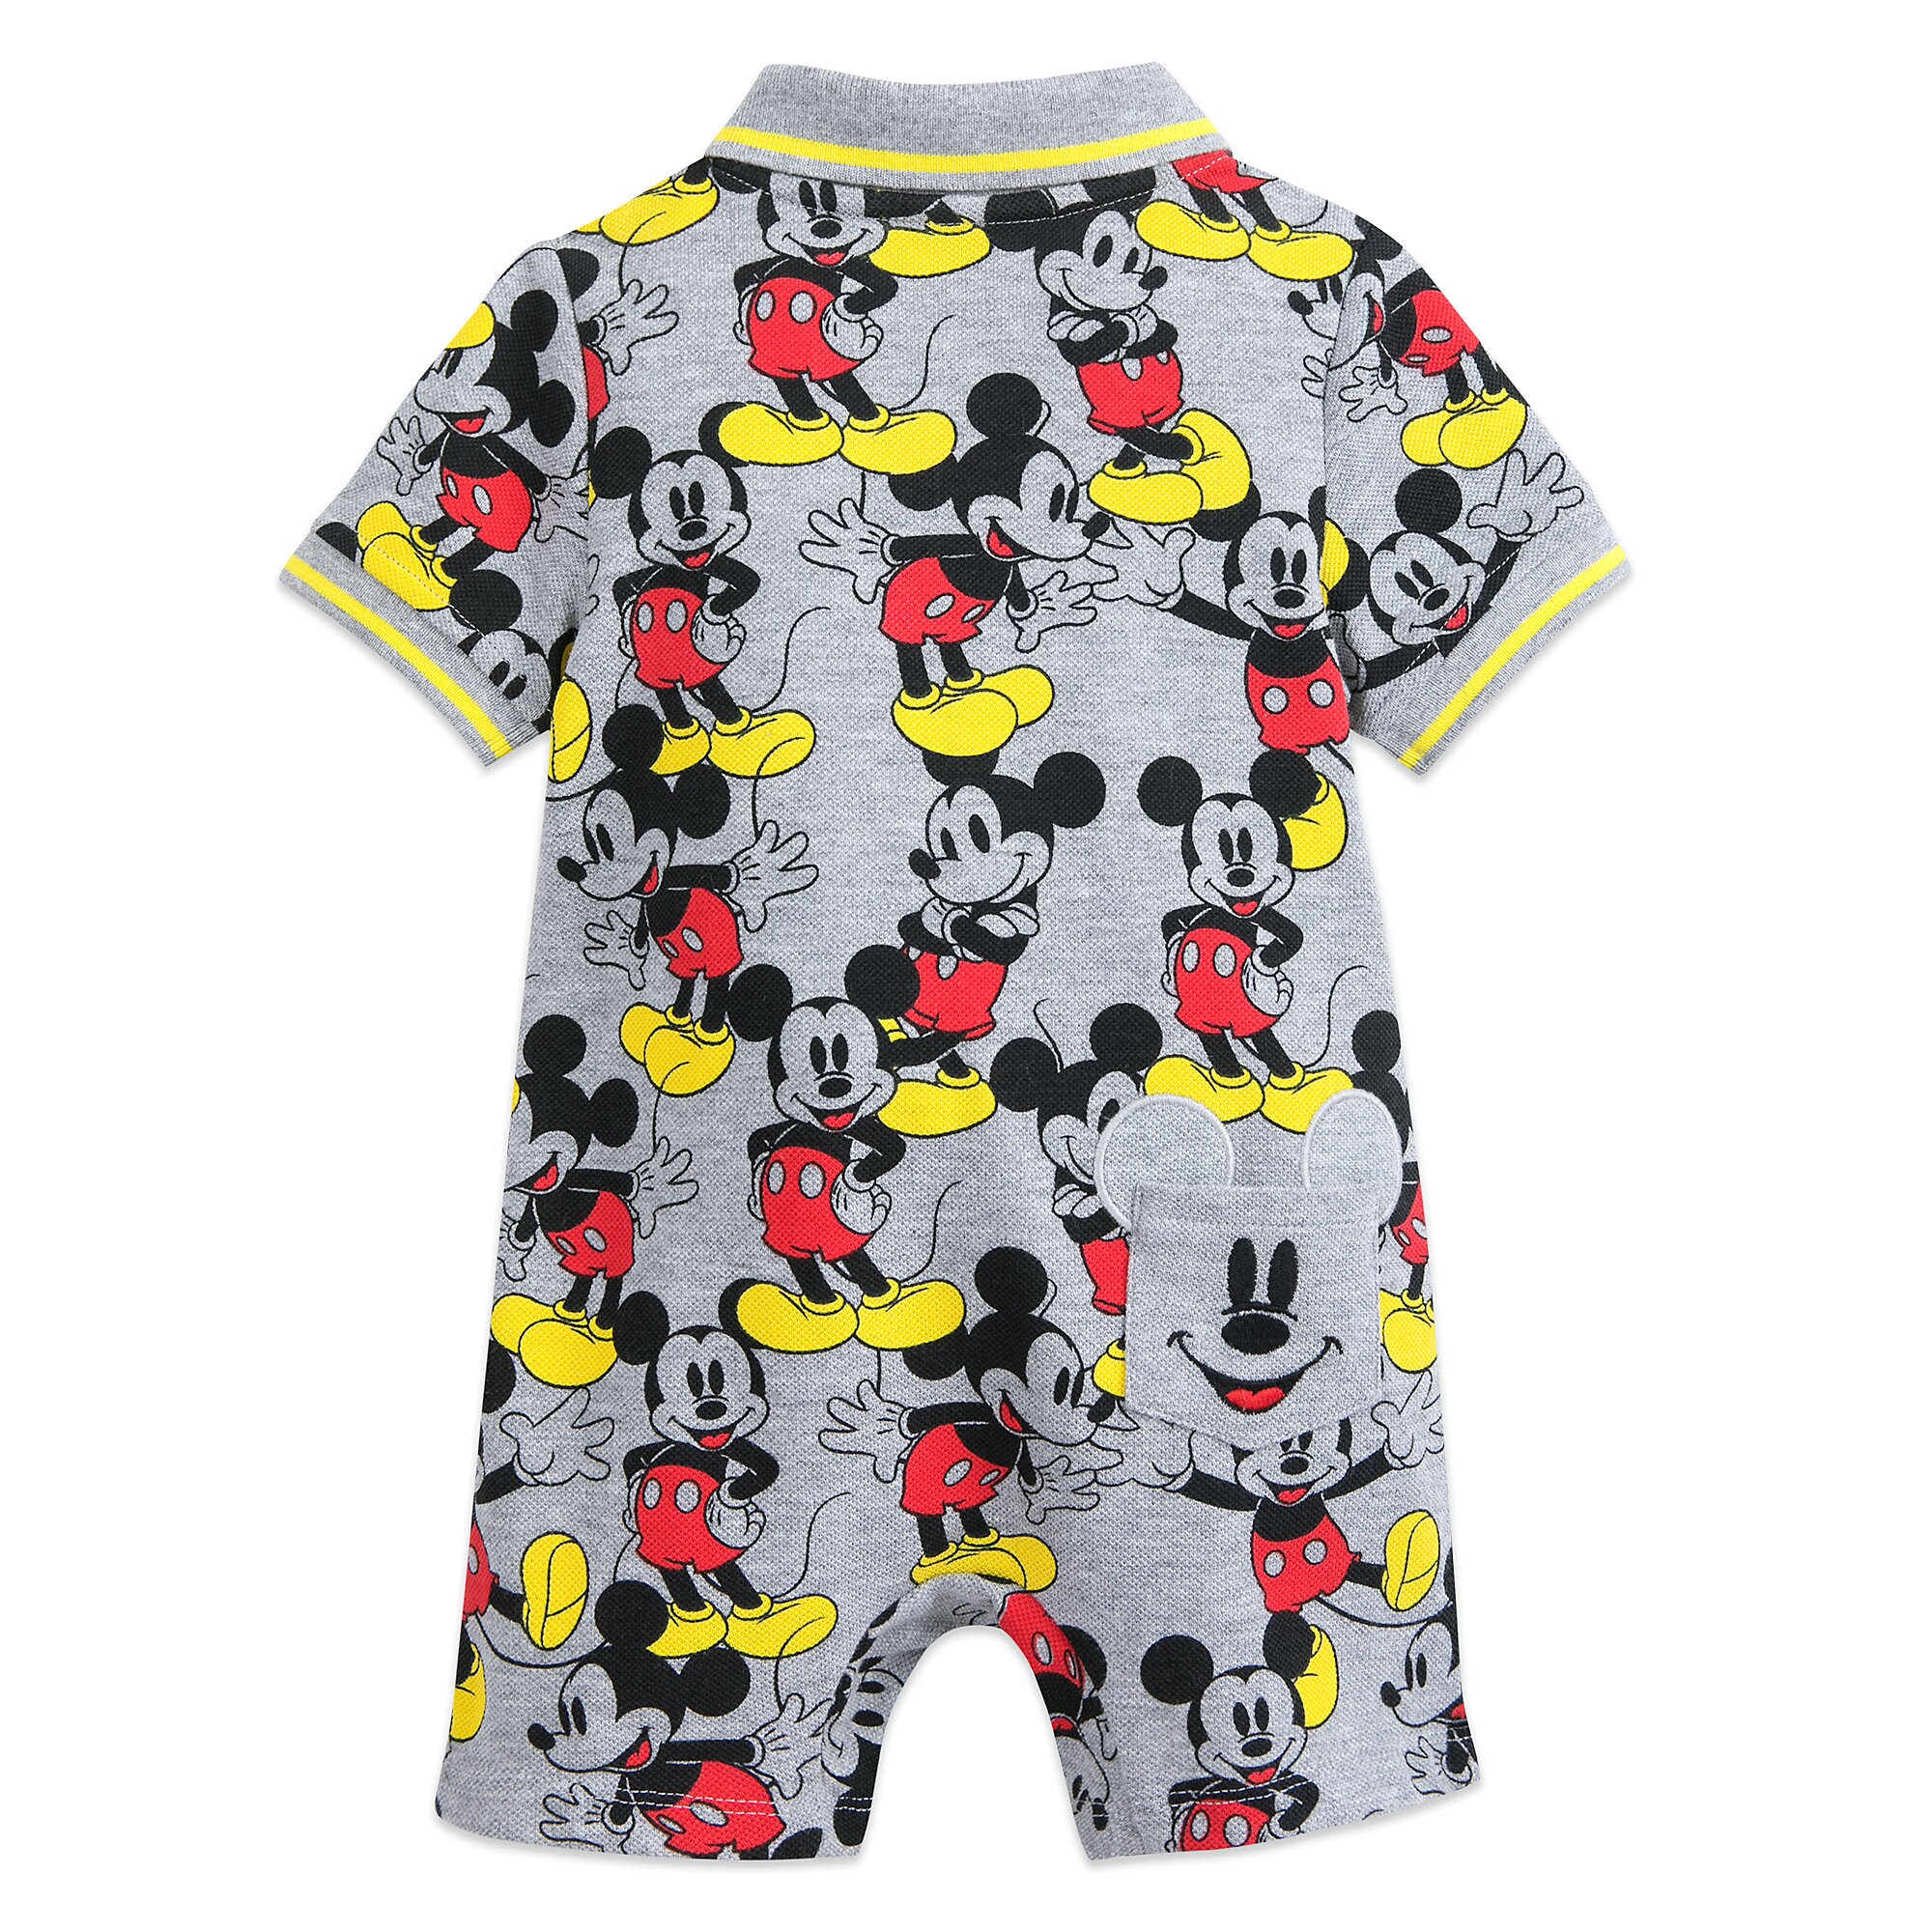 Mickey Mouse Romper for Baby available online – Dis Merchandise News